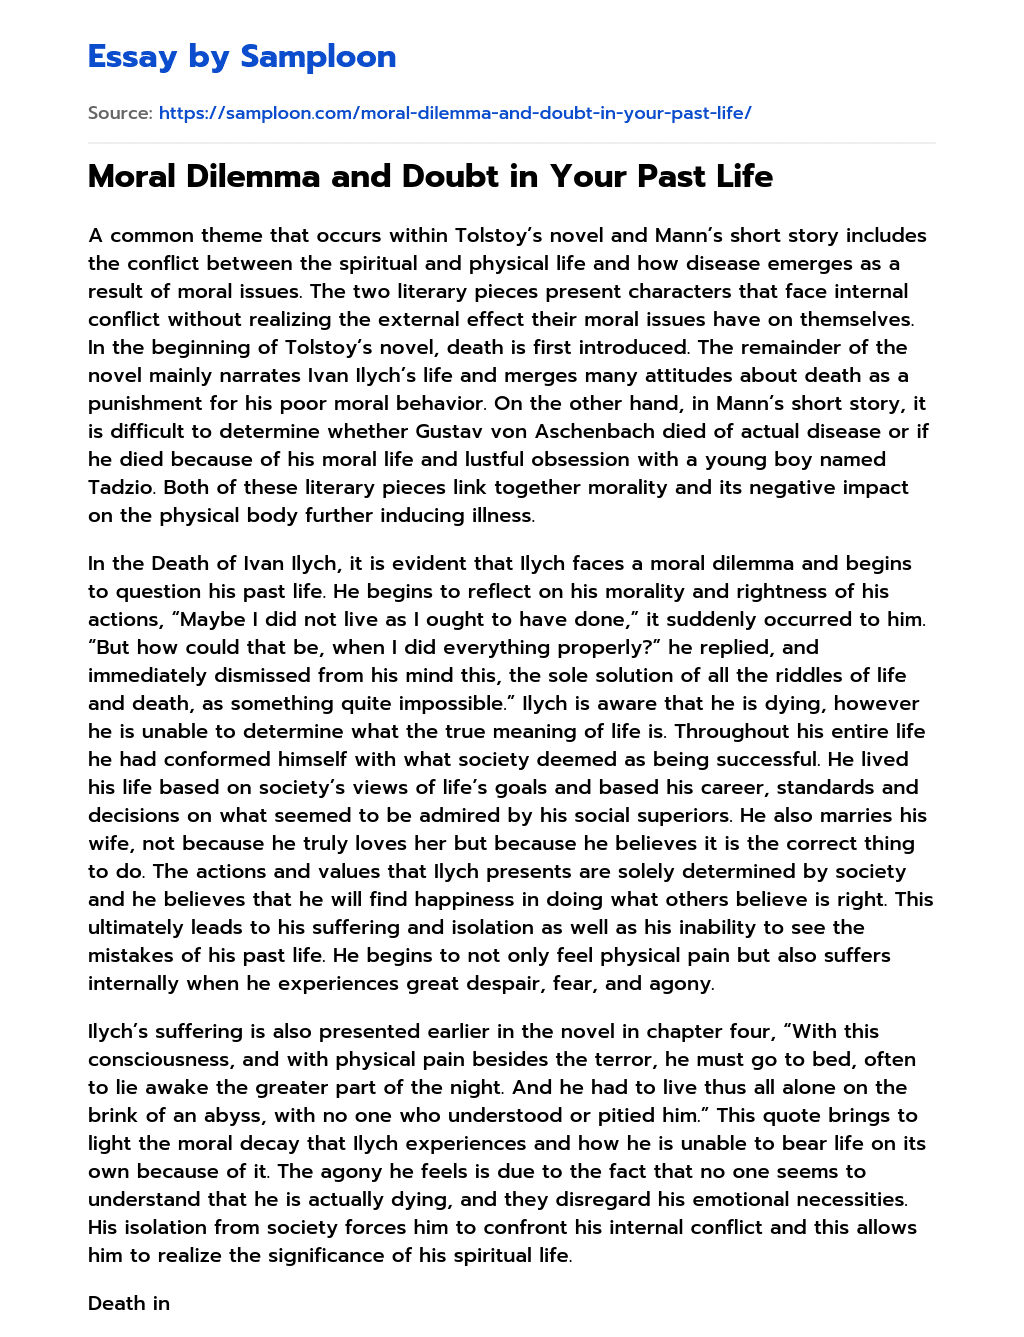 Moral Dilemma and Doubt in Your Past Life essay